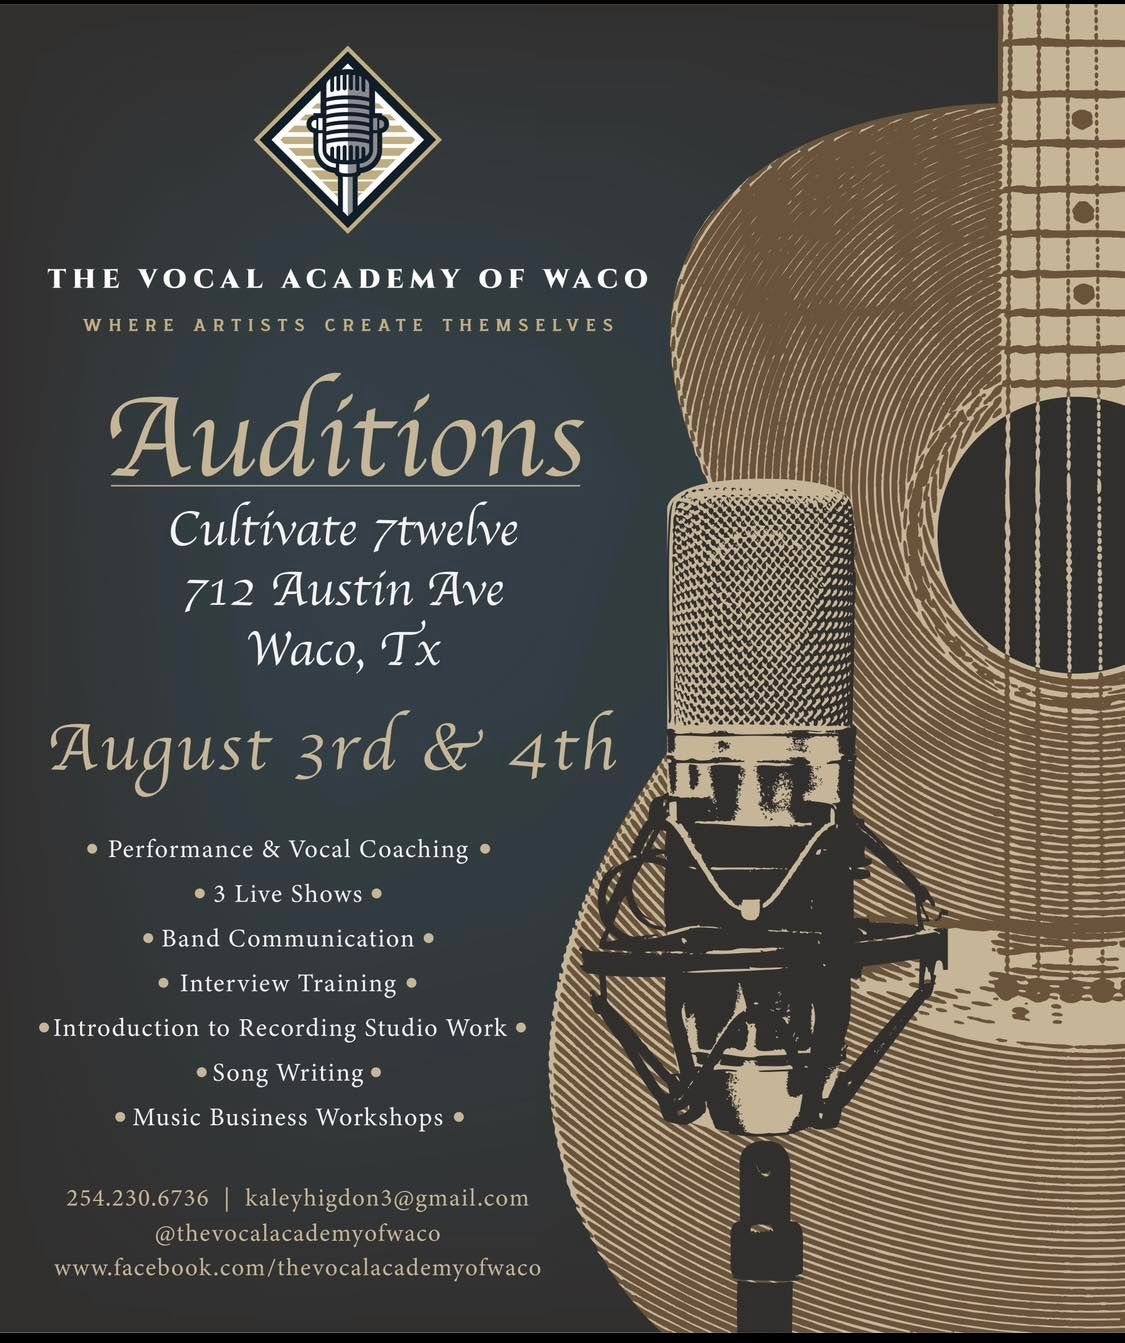 Auditions-The Vocal Academy of Waco